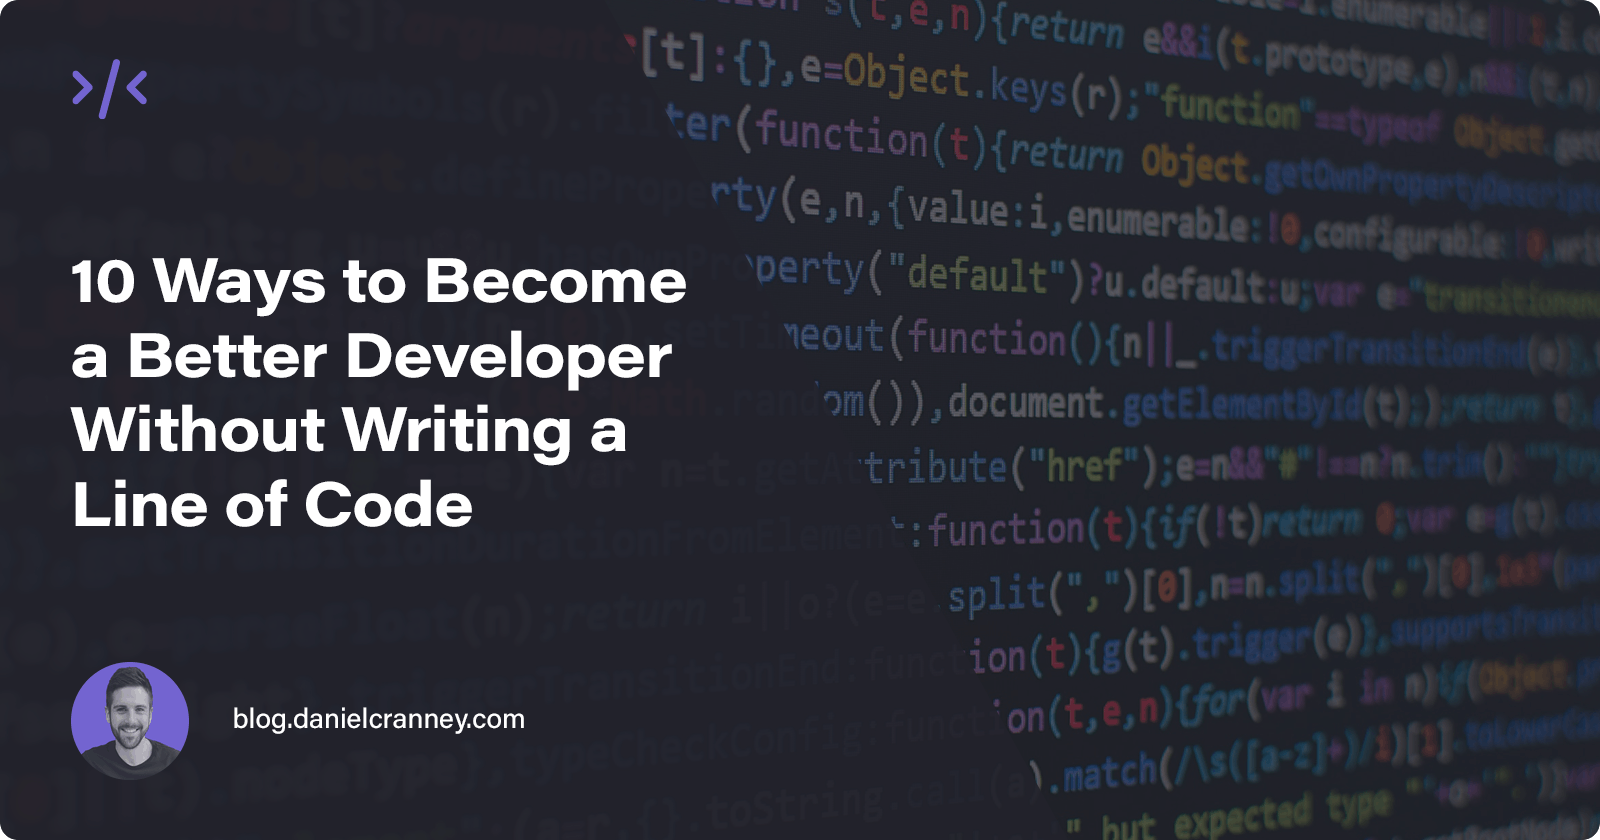 10 Ways to Become a Better Developer Without Writing a Line of Code